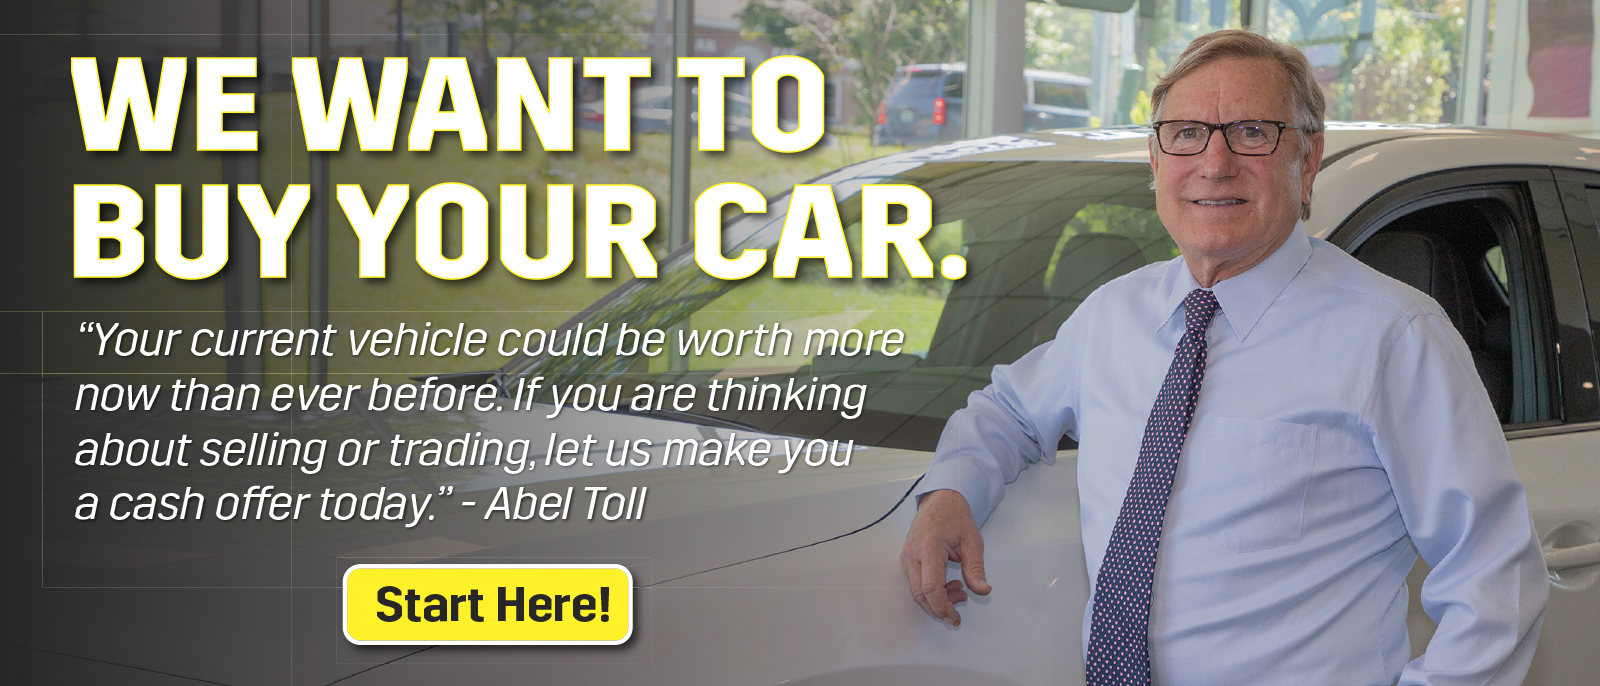 We Want To Buy Your Car.